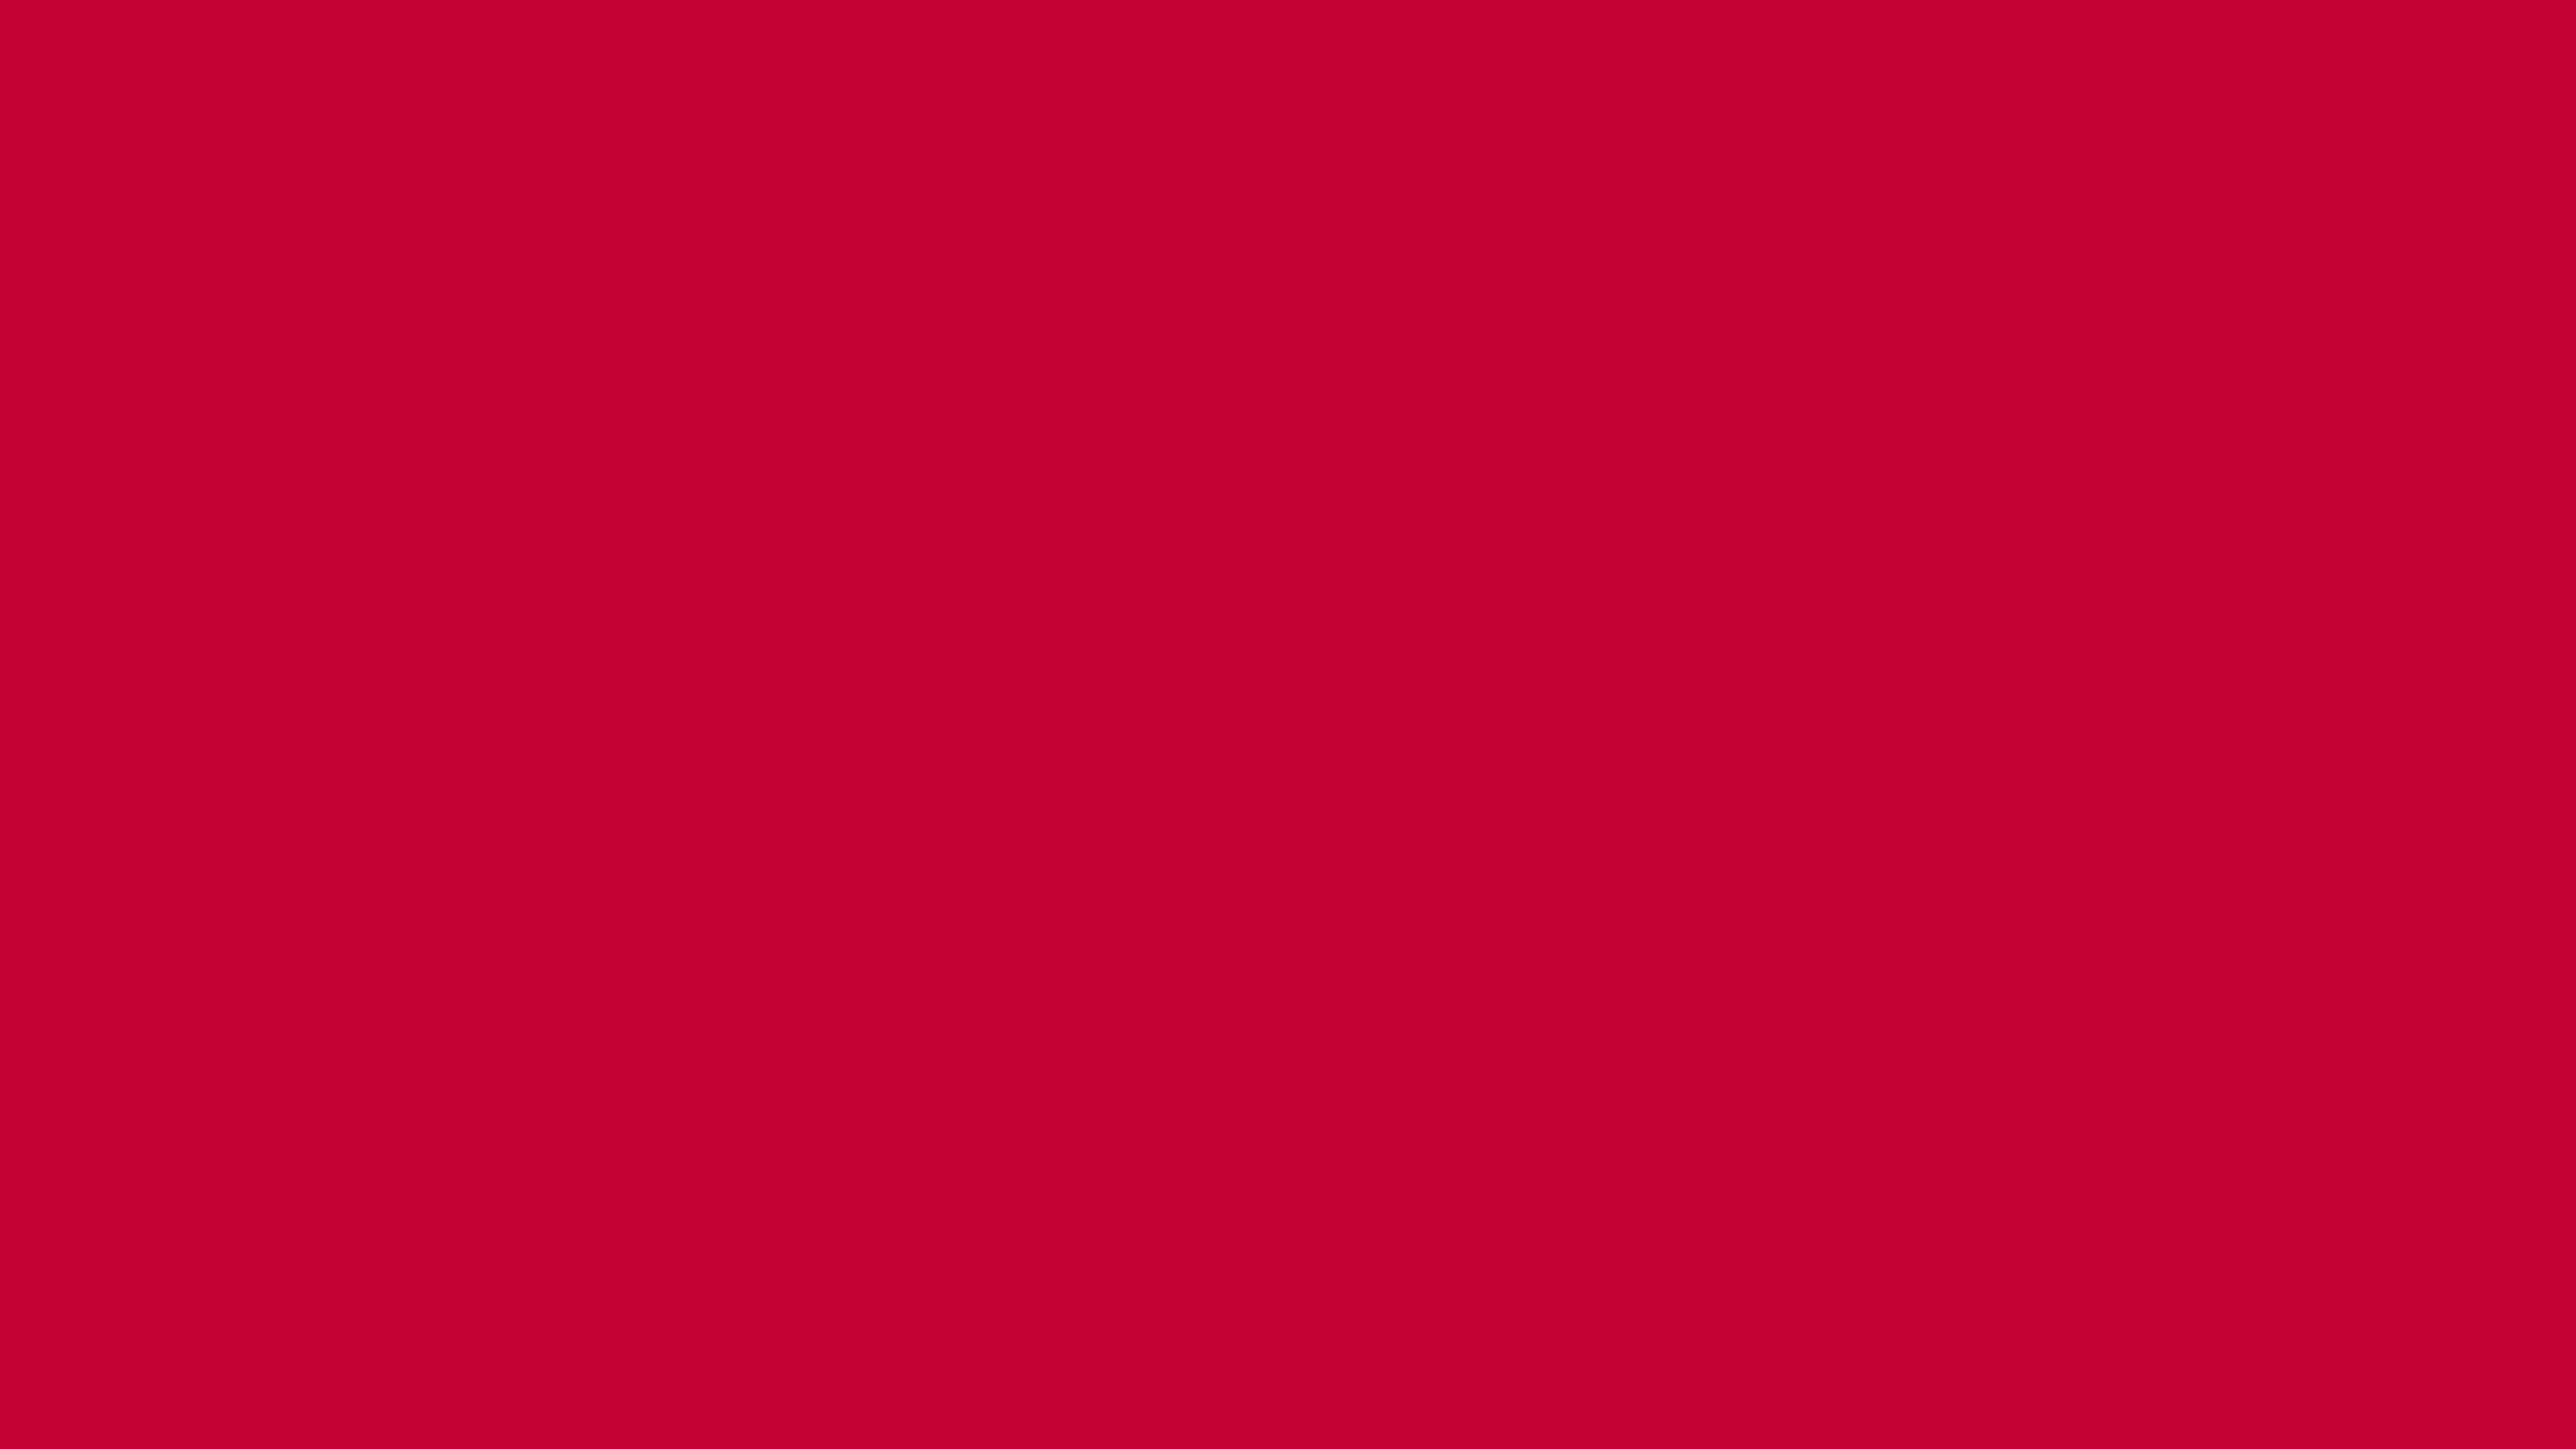 7680x4320 Red NCS Solid Color Background